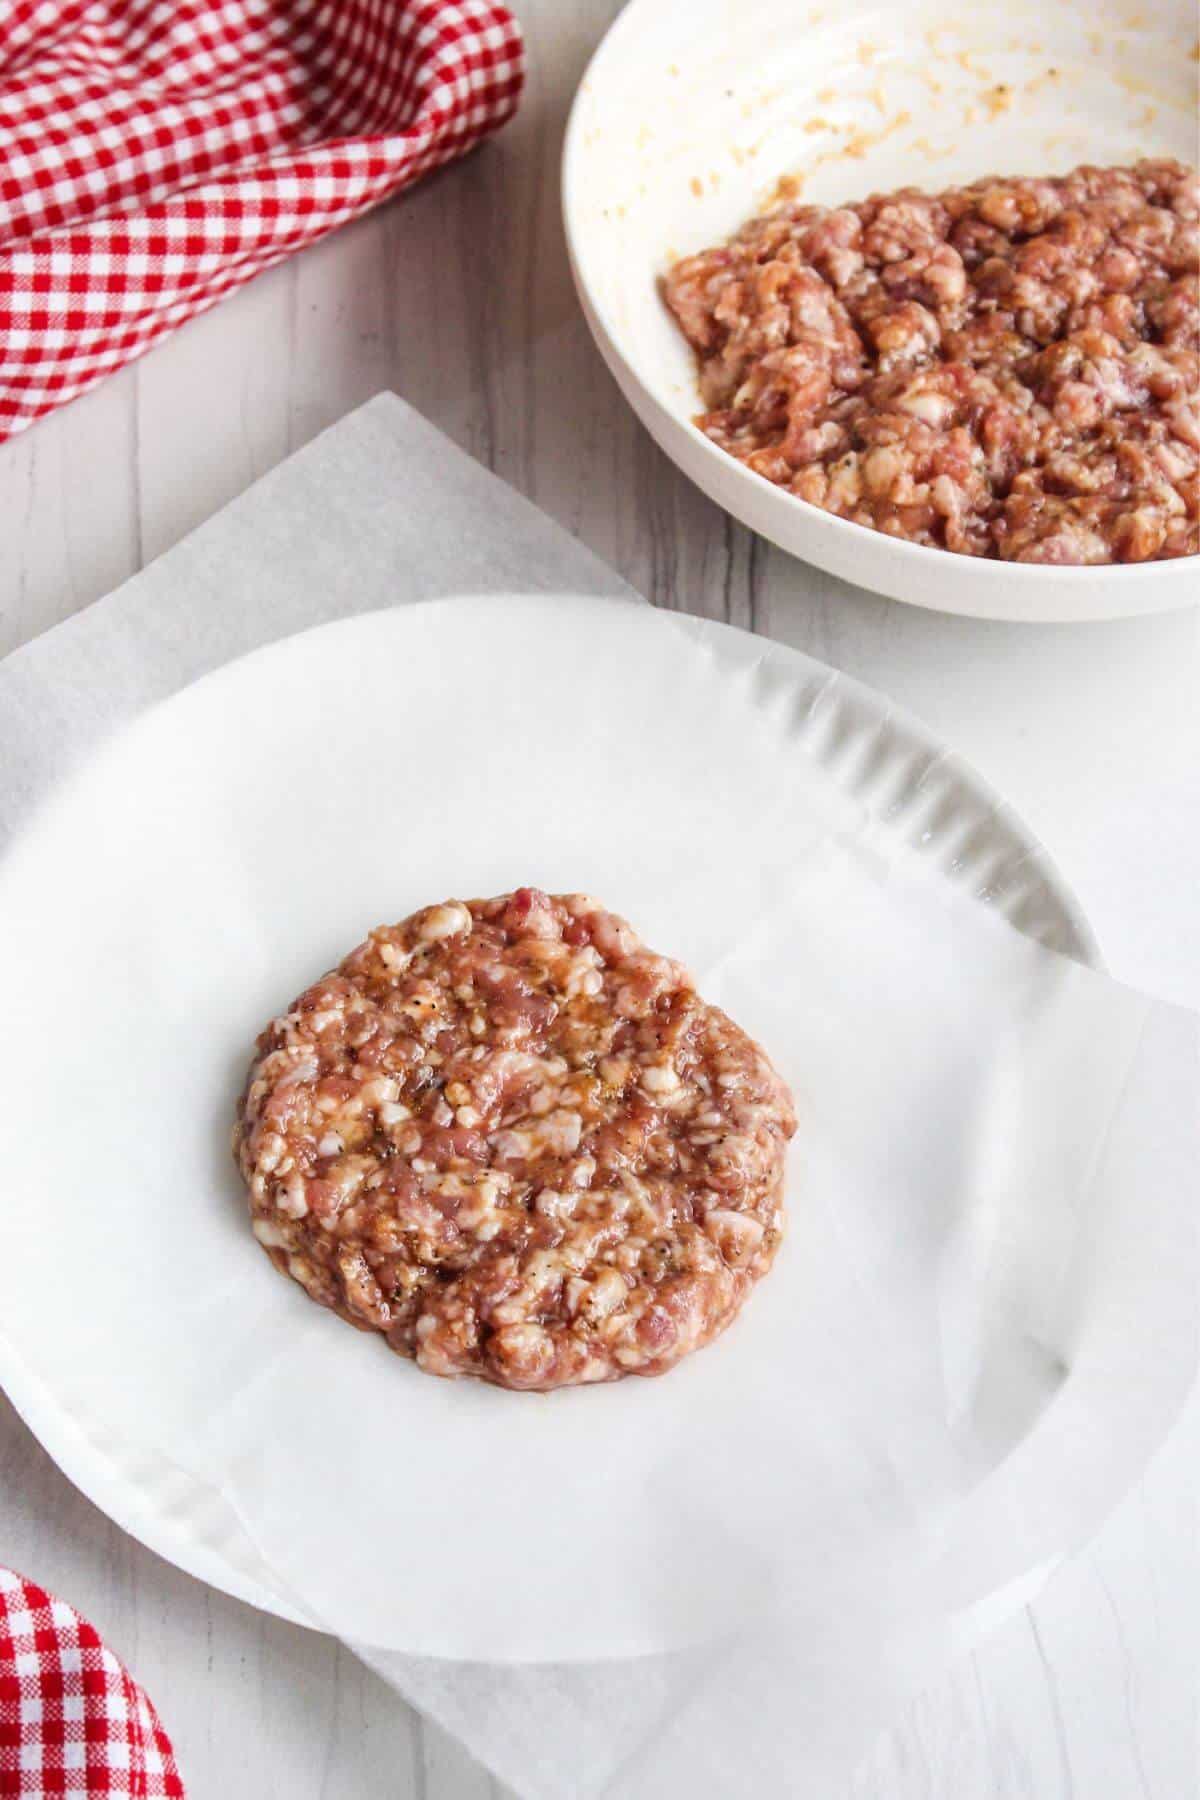 Ground pork patty on a plate with bowl of meat mixture in back.